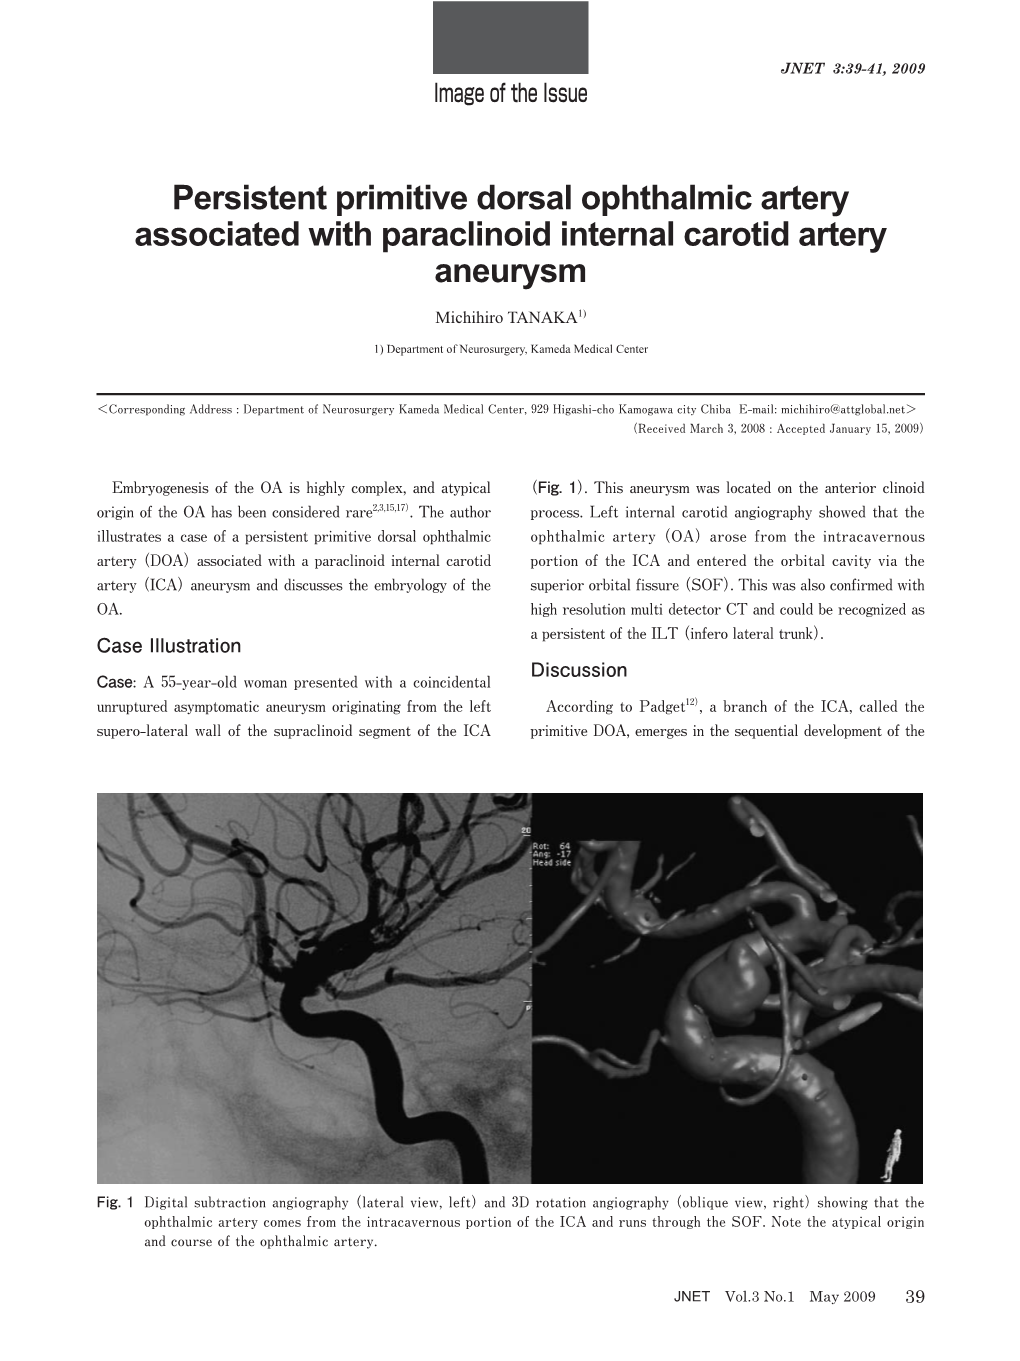 Persistent Primitive Dorsal Ophthalmic Artery Associated with Paraclinoid Internal Carotid Artery Aneurysm